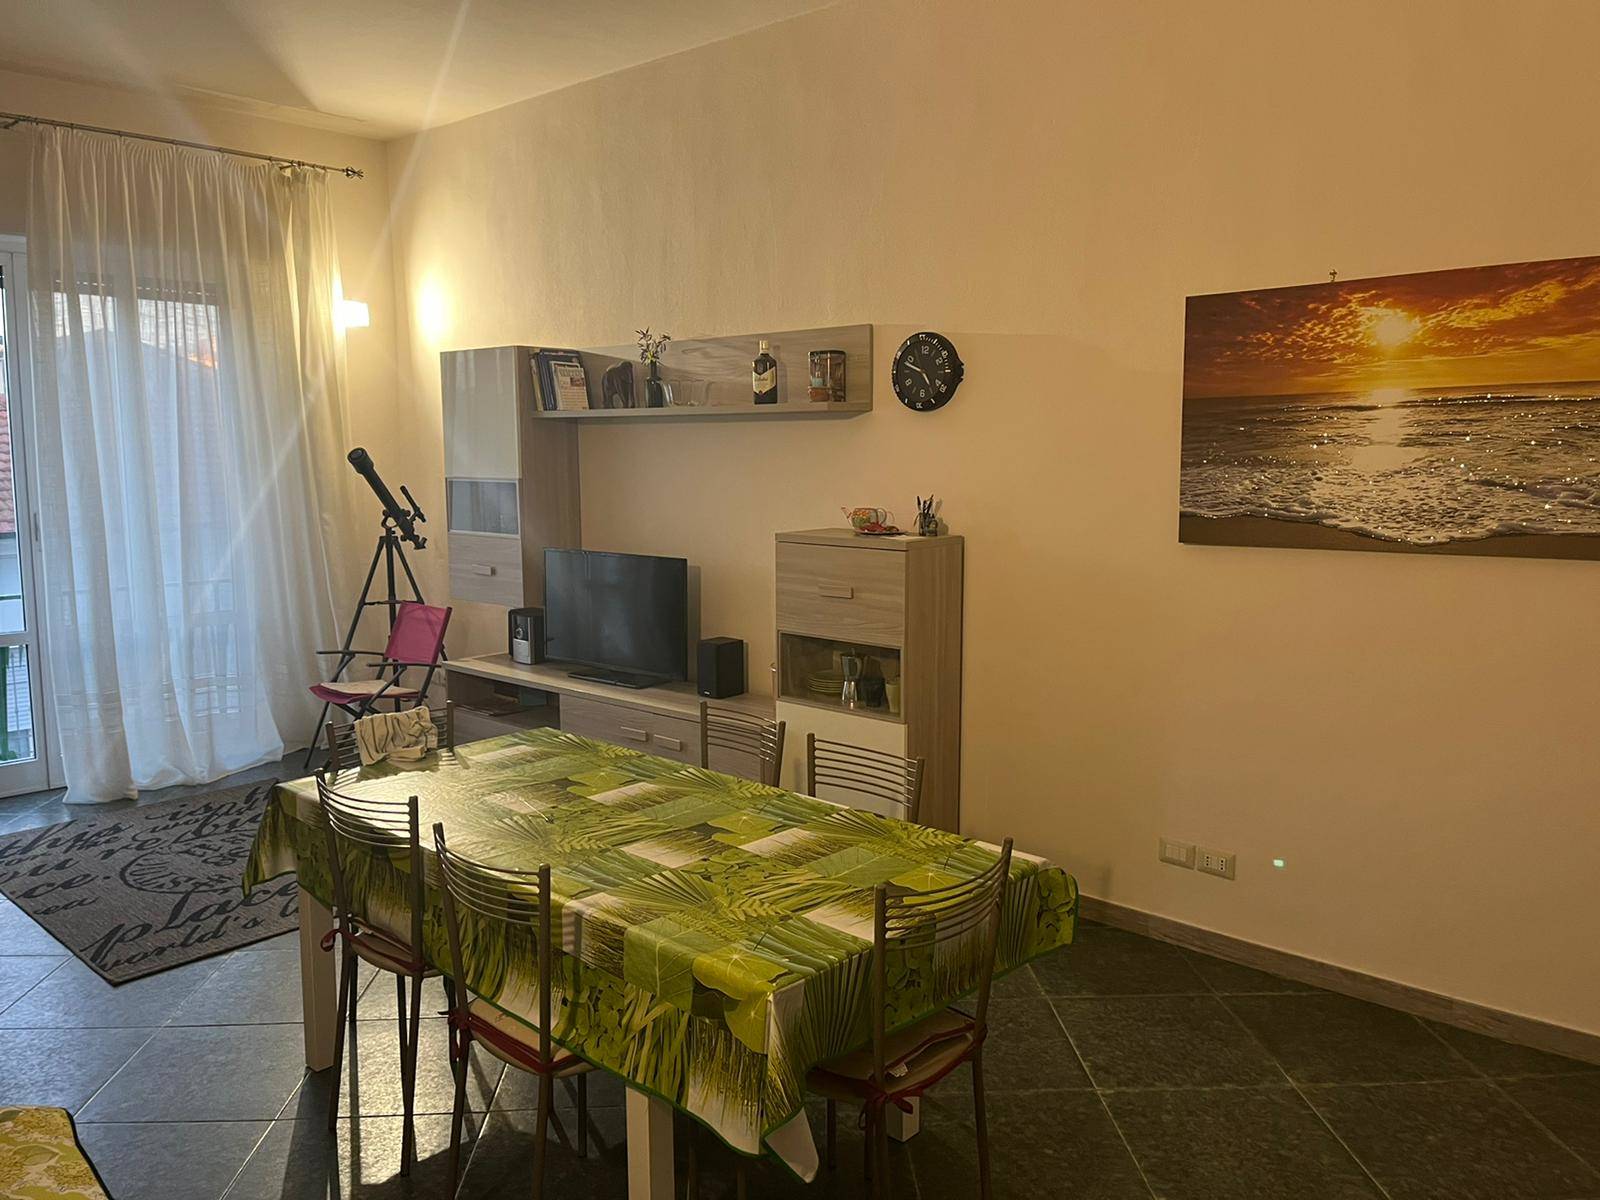 MARCO POLO, VIAREGGIO, Apartment for the vacation for rent of 87 Sq. mt., Excellent Condition, Heating Individual heating system, Energetic class: G, 